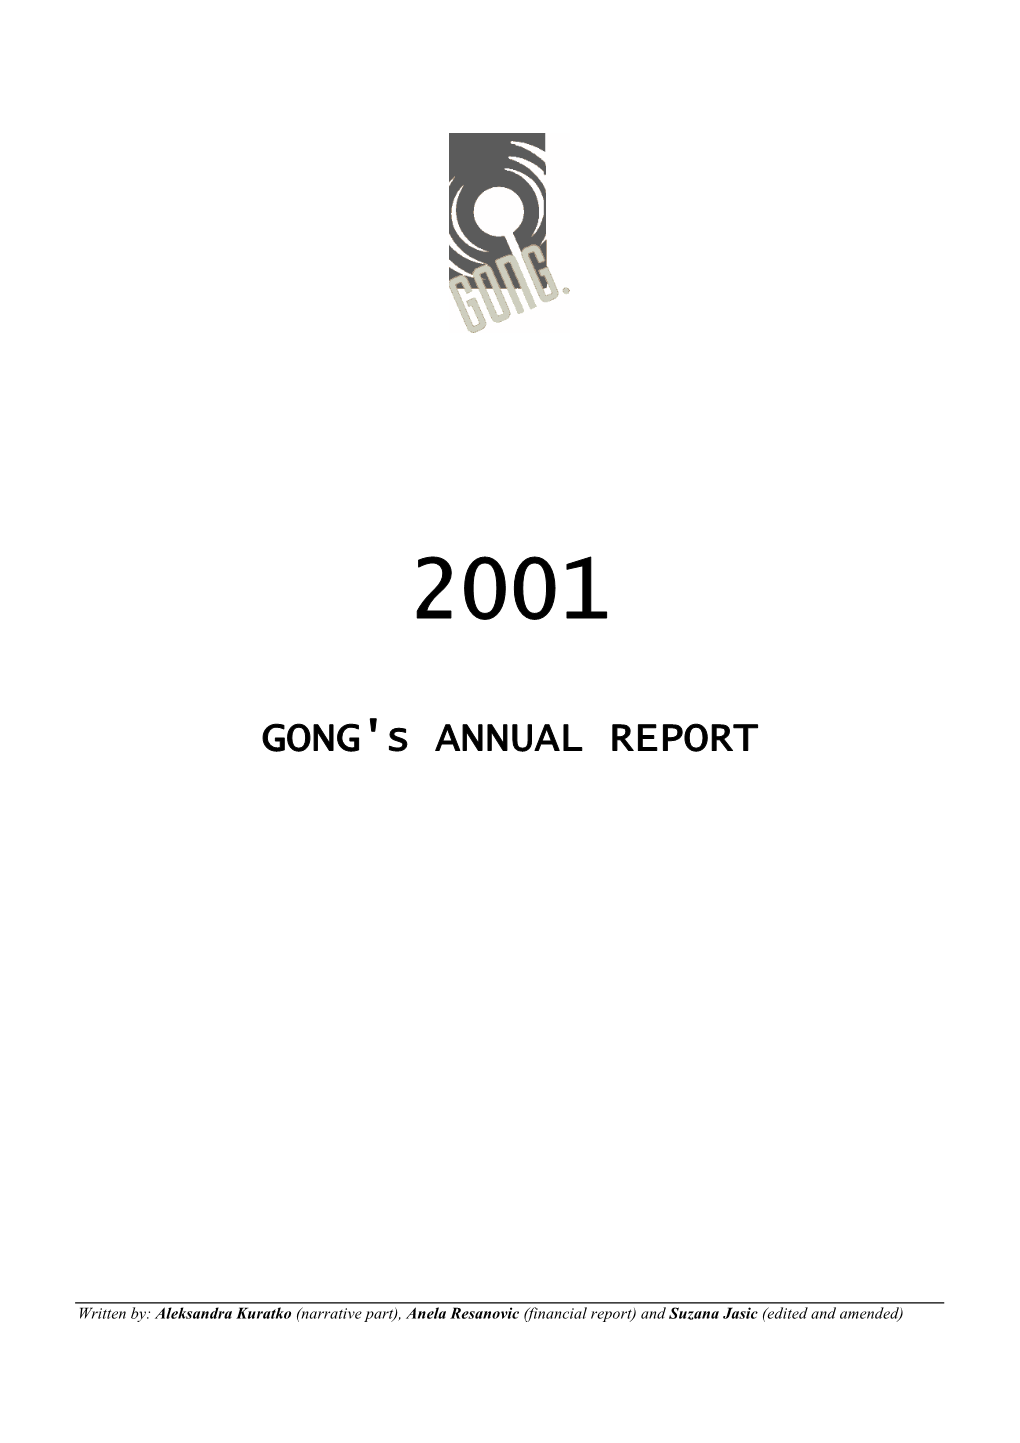 GONG's ANNUAL REPORT